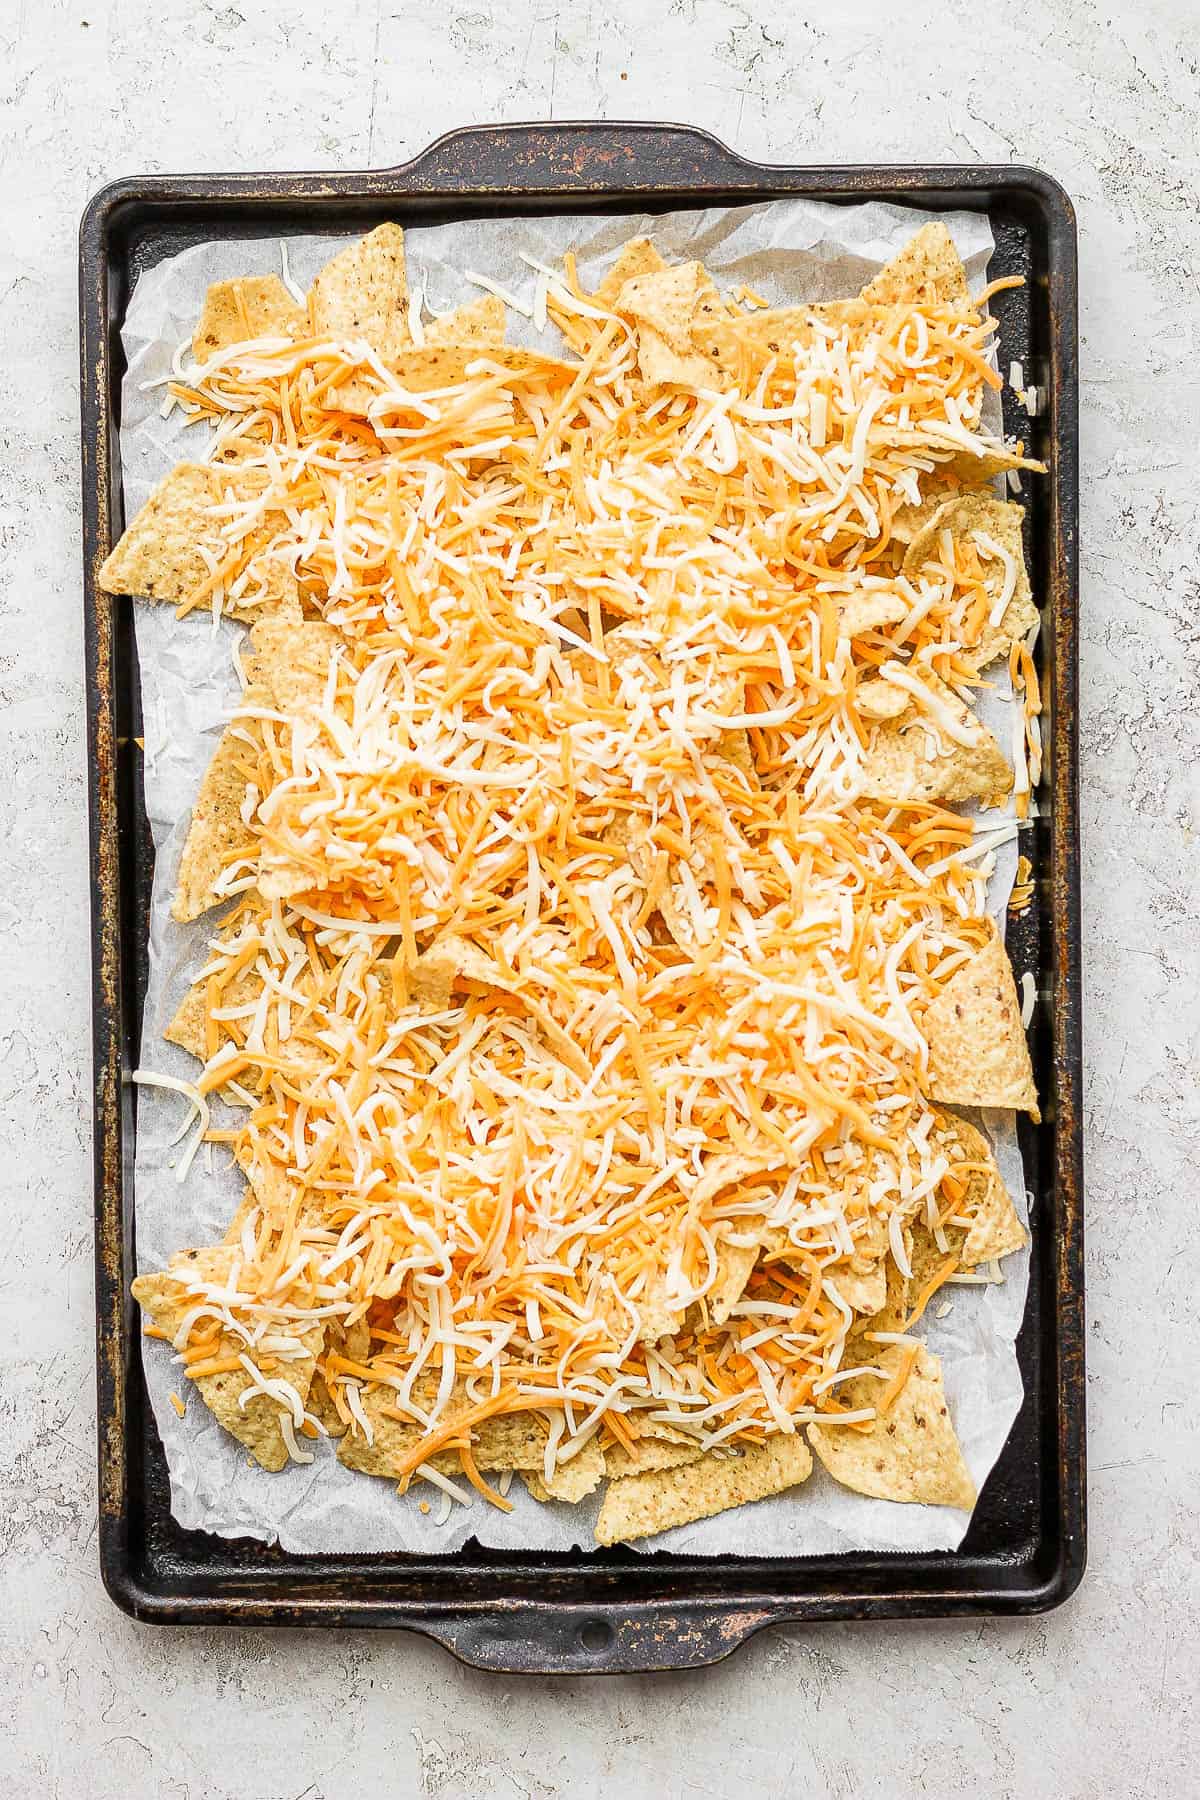 Shredded cheese added to the tortilla chips.